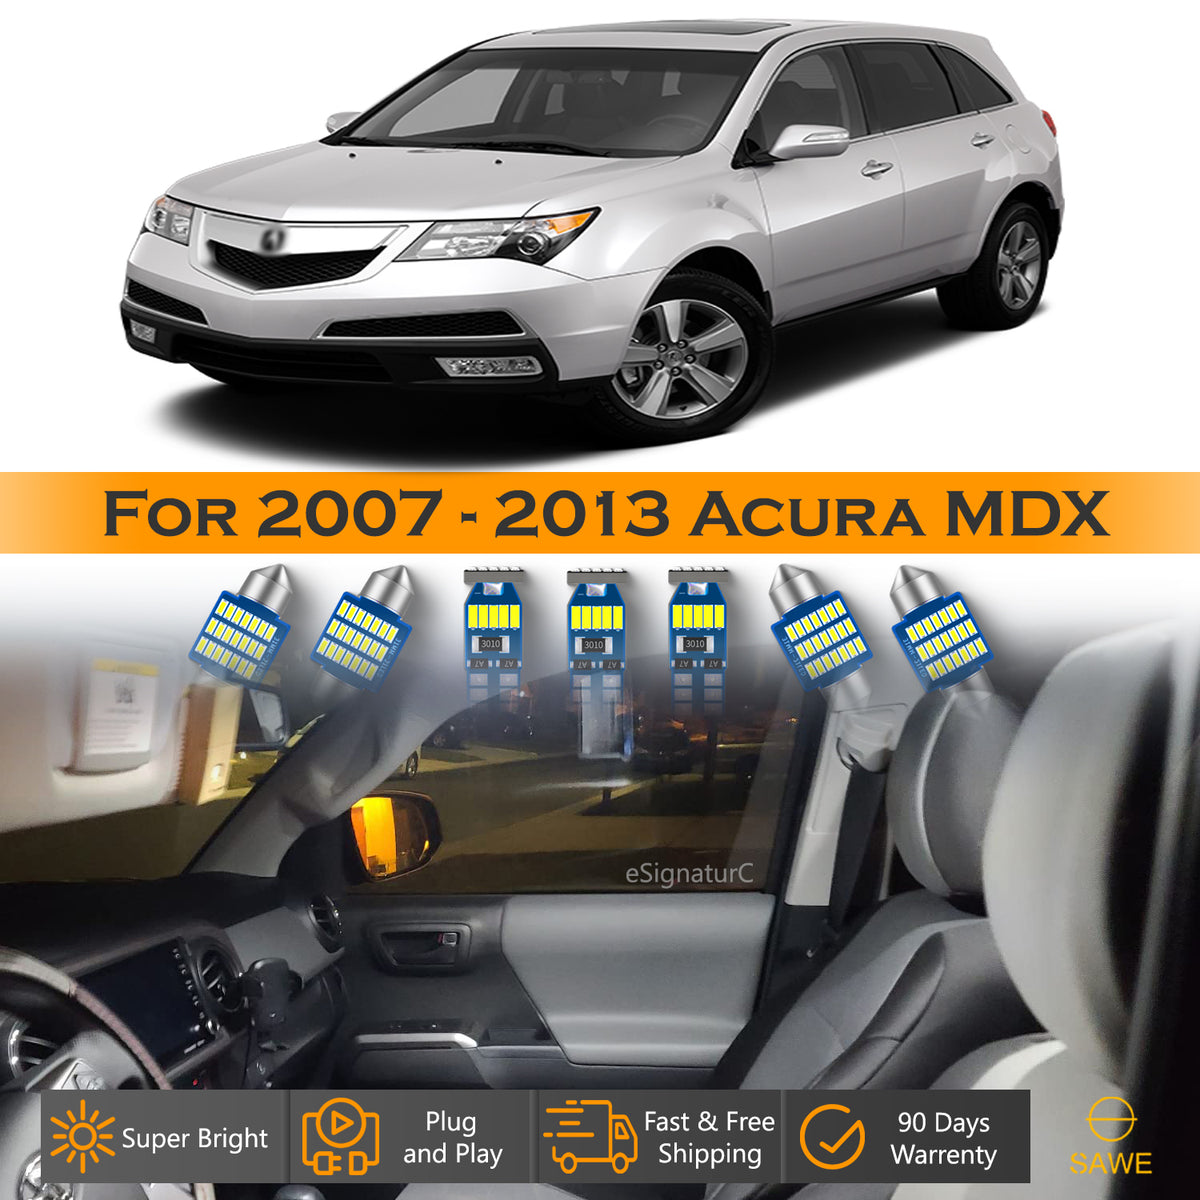 For Acura MDX Interior LED Lights - Dome & Map Light Bulbs Package Kit for 2007 - 2013 - White